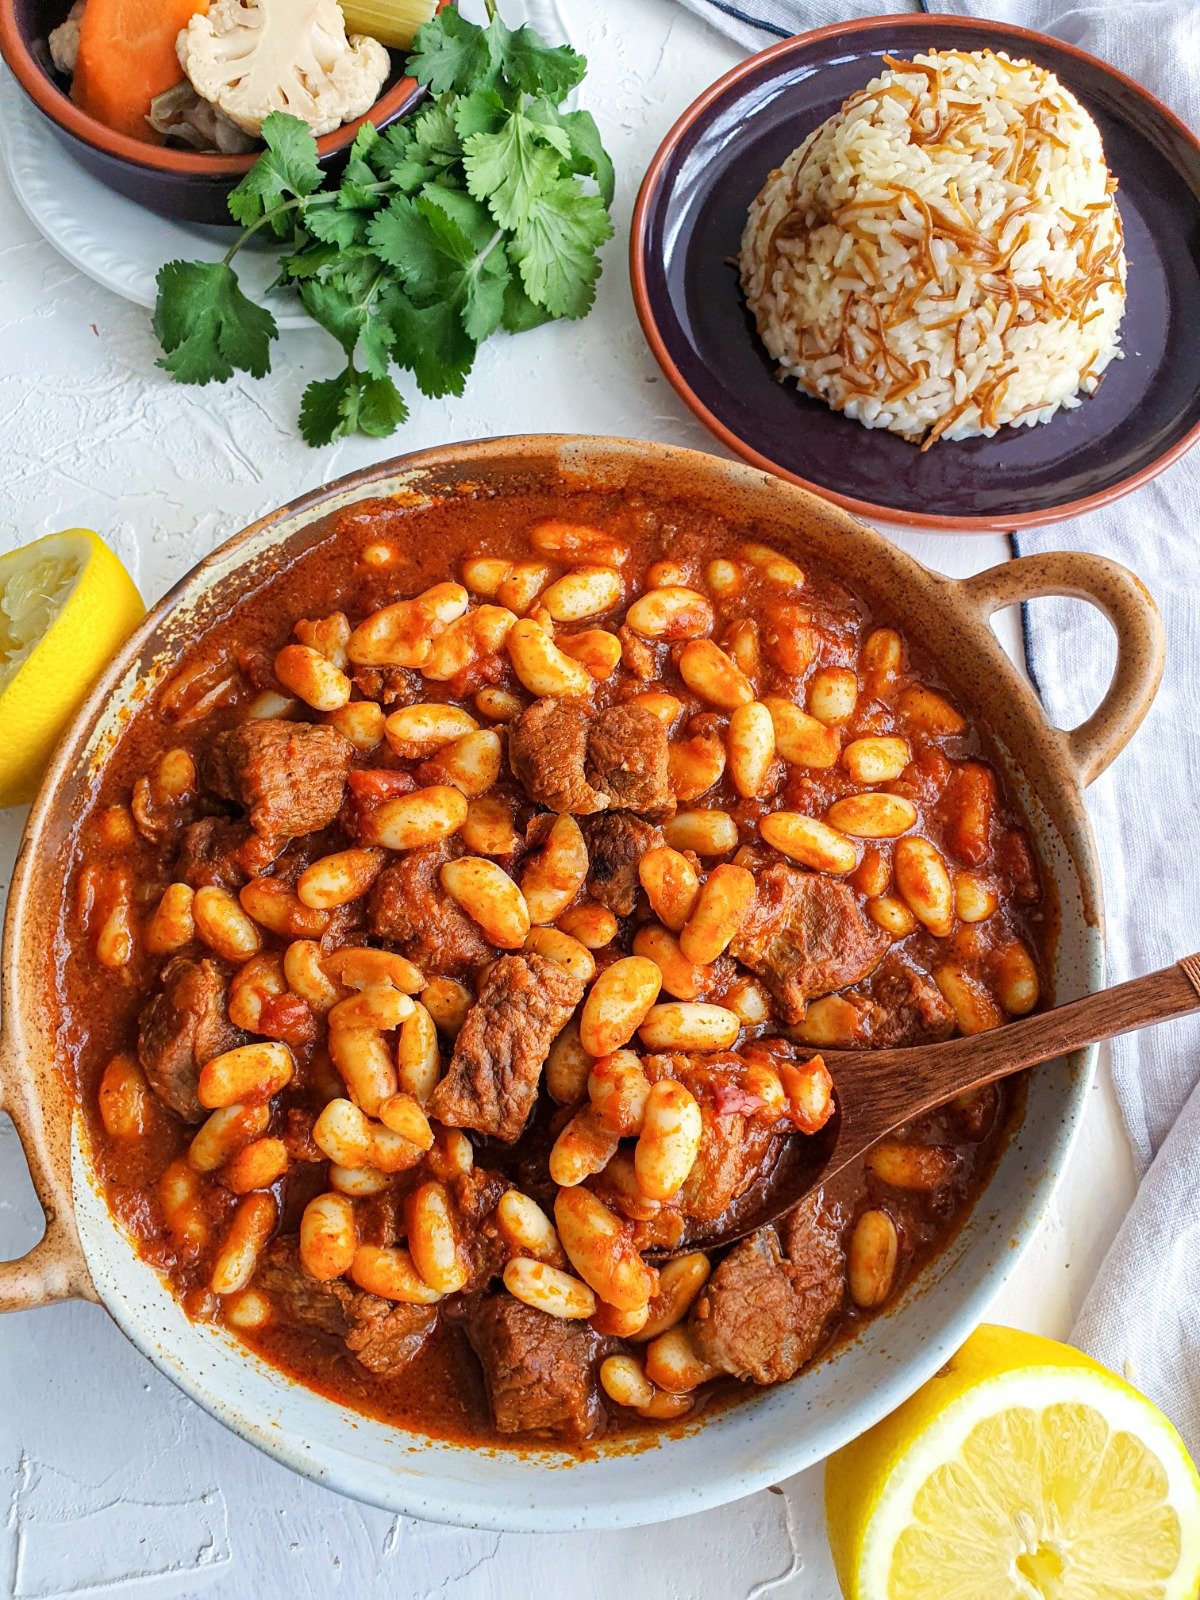 Kuru Fasulye Turkish White Bean Stew is so popular that its Turkish name is simply the name for dried white beans.